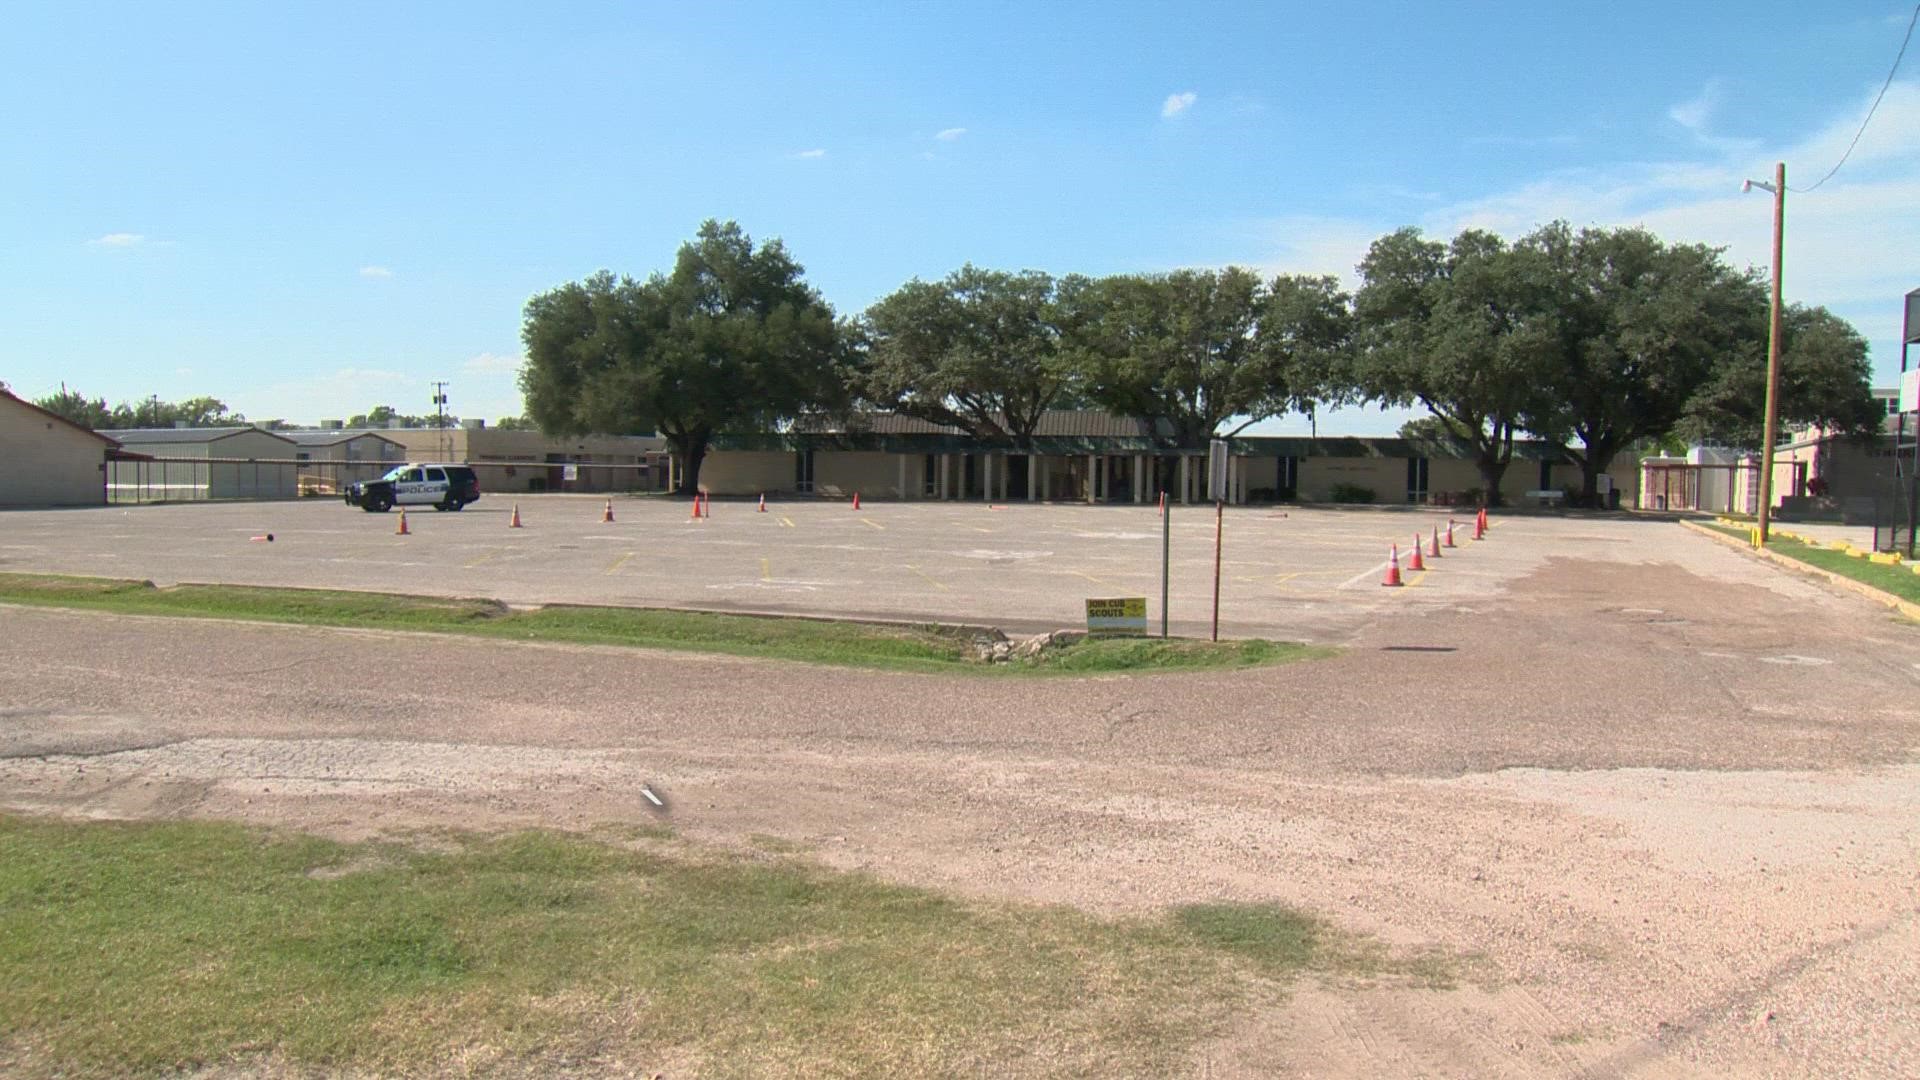 For the second day in a row, a Central Texas school district was disrupted by a school shooting threat.